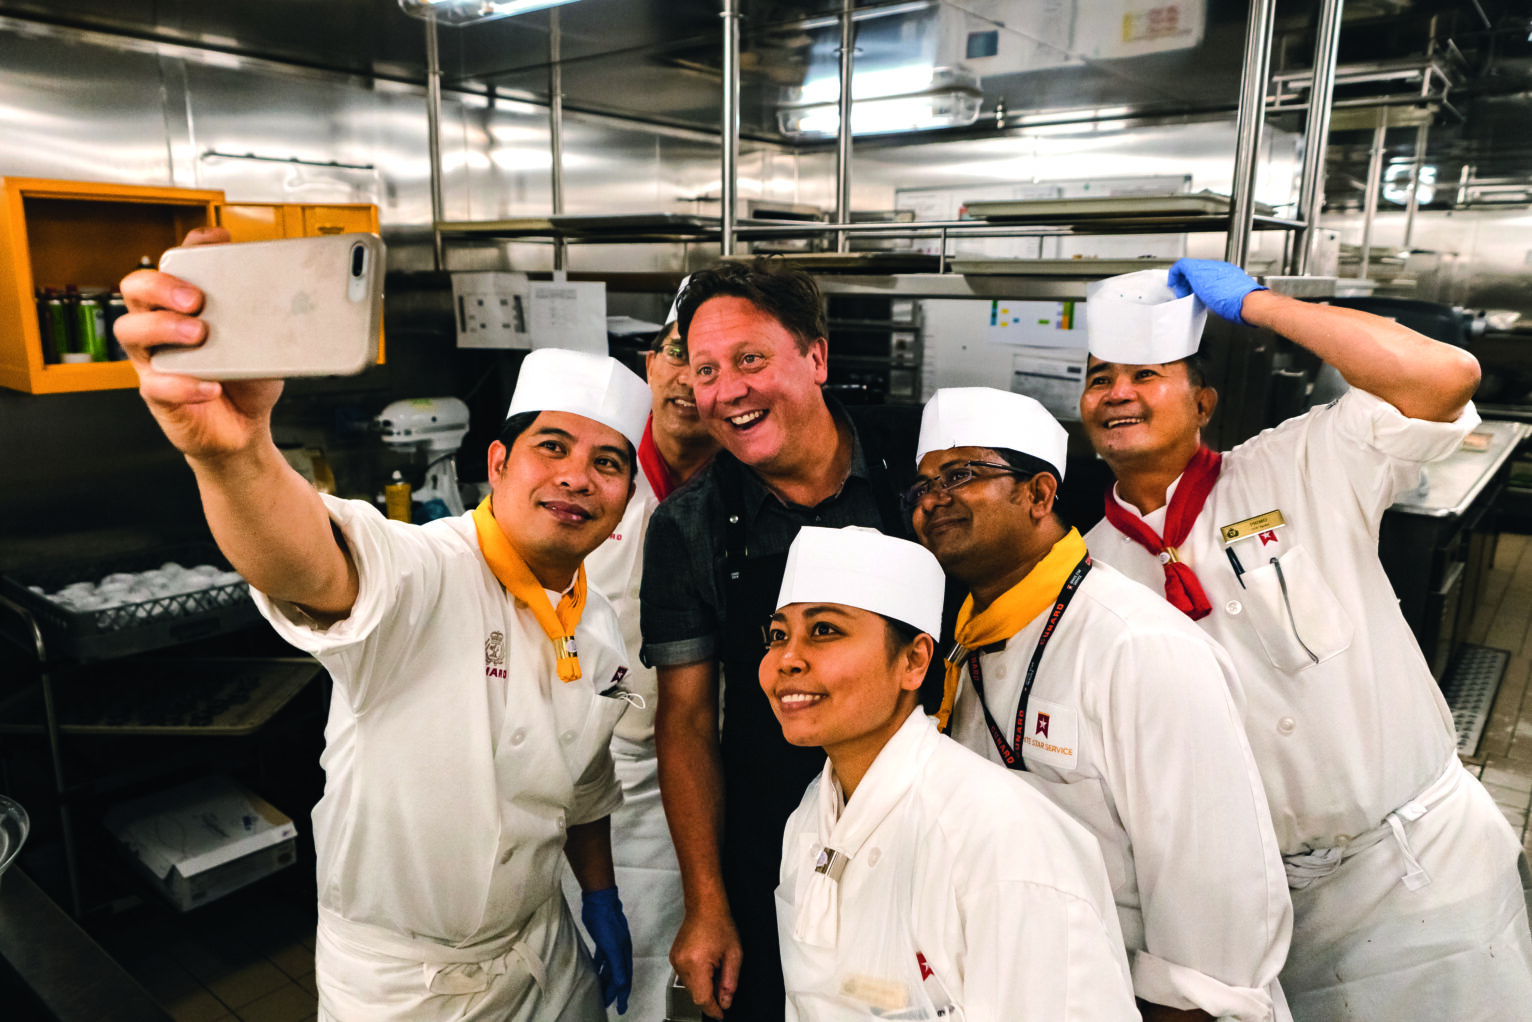 Celebrity Chef Darren Purchese on board the Queen Elizabeth with the staff